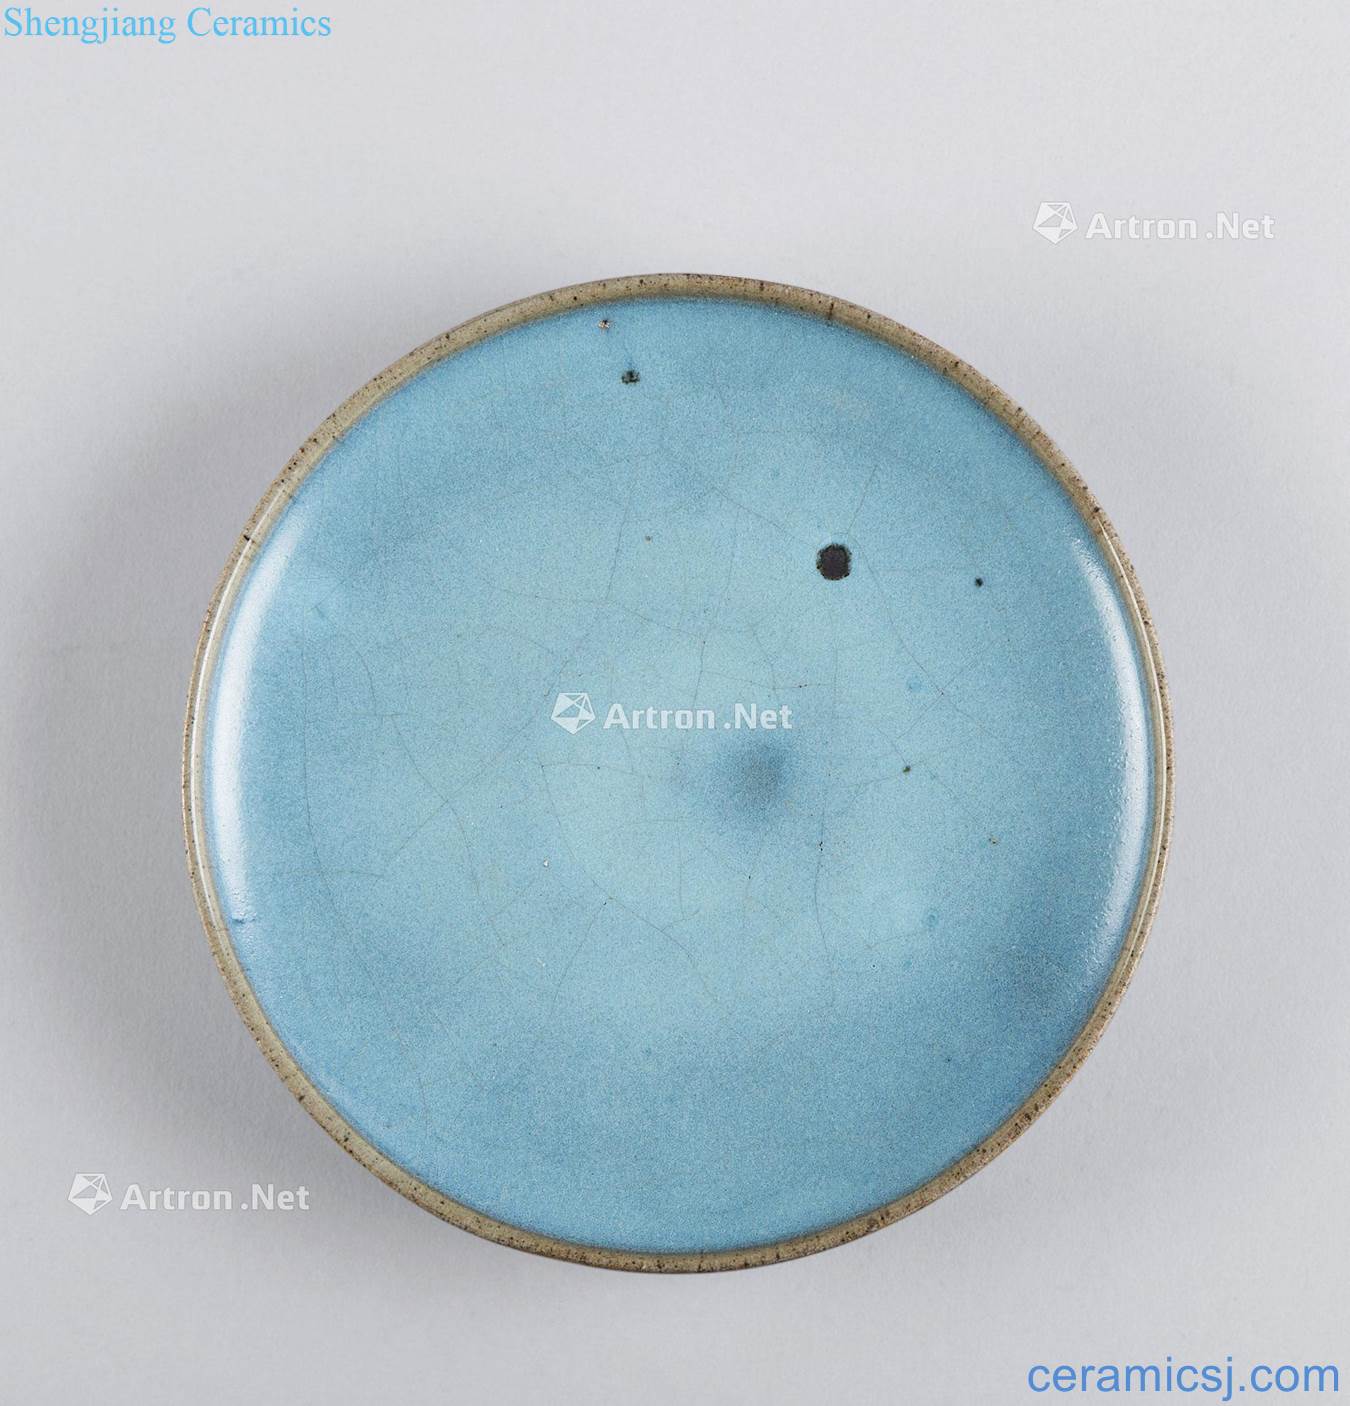 The yuan dynasty (1271-1368) plate masterpieces